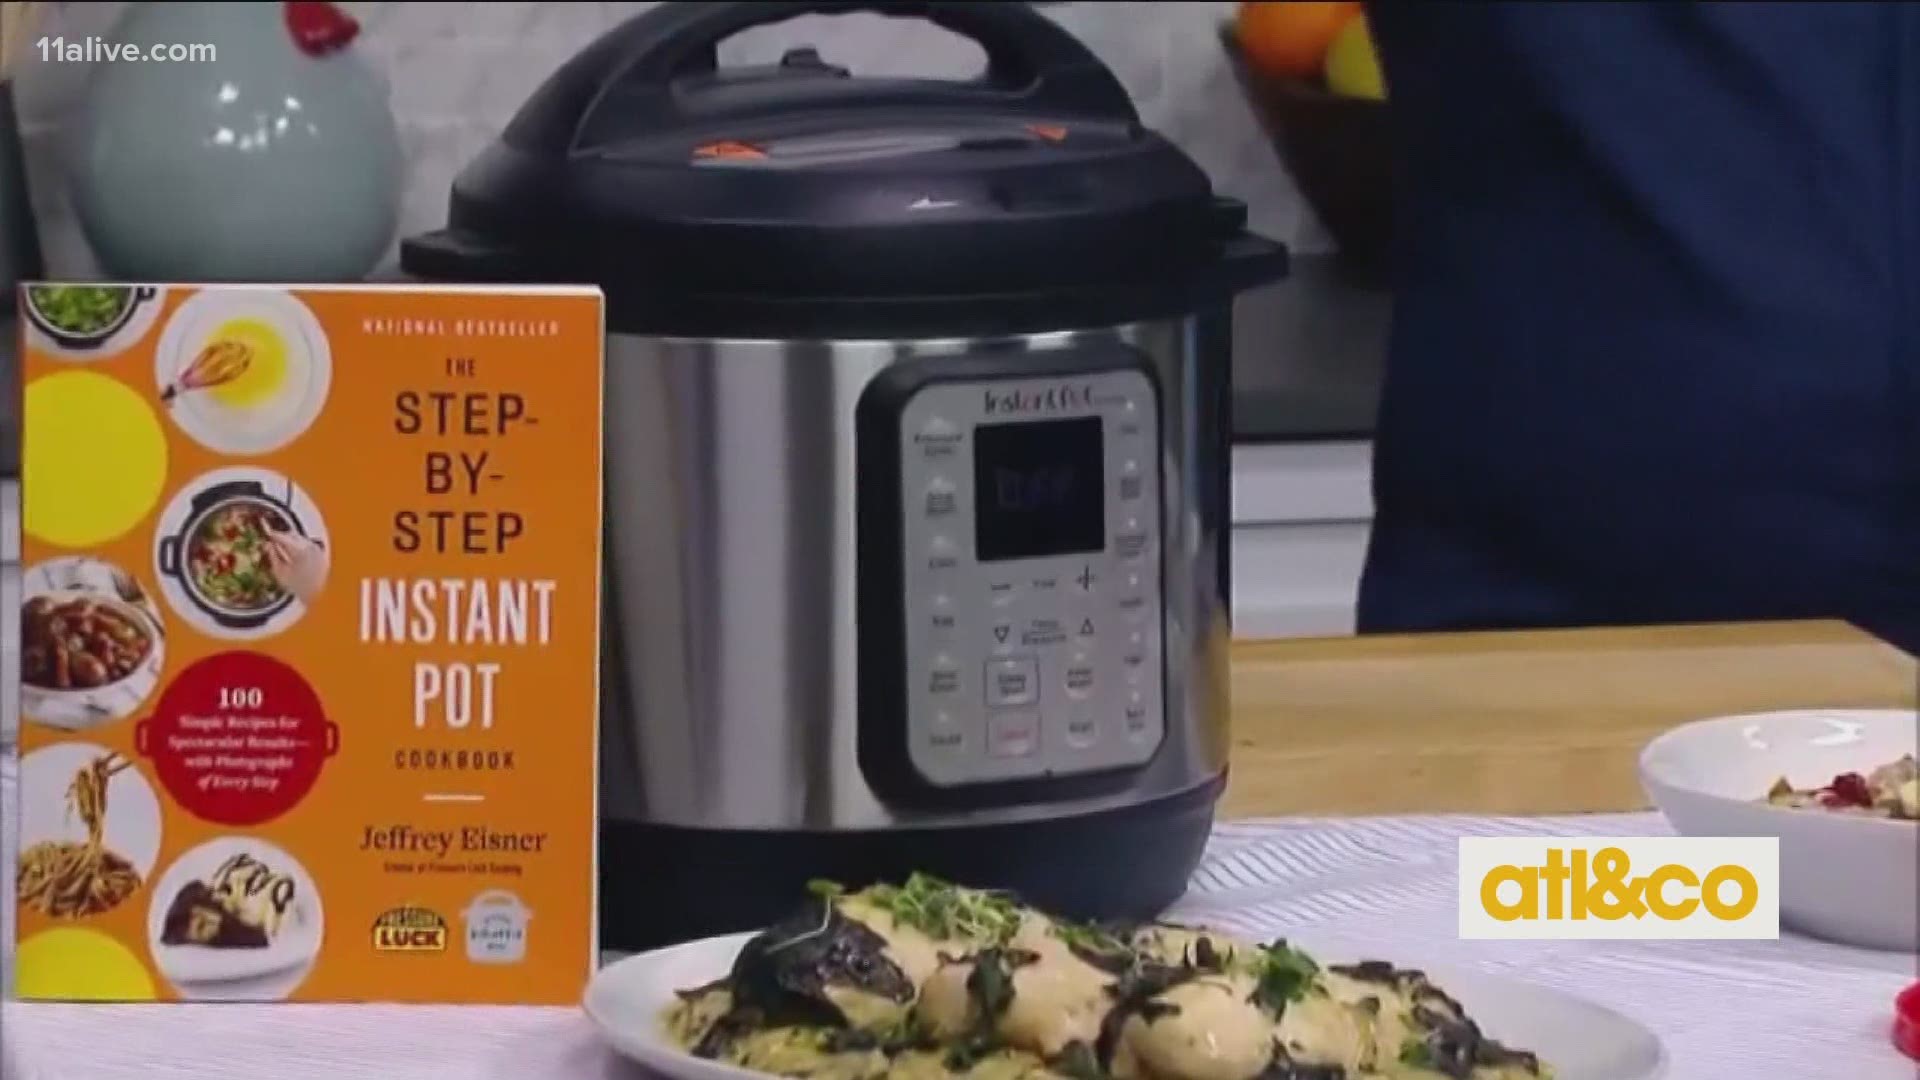 Bestselling author and cook Jeffrey Eisner shares Instant Pot recipes.